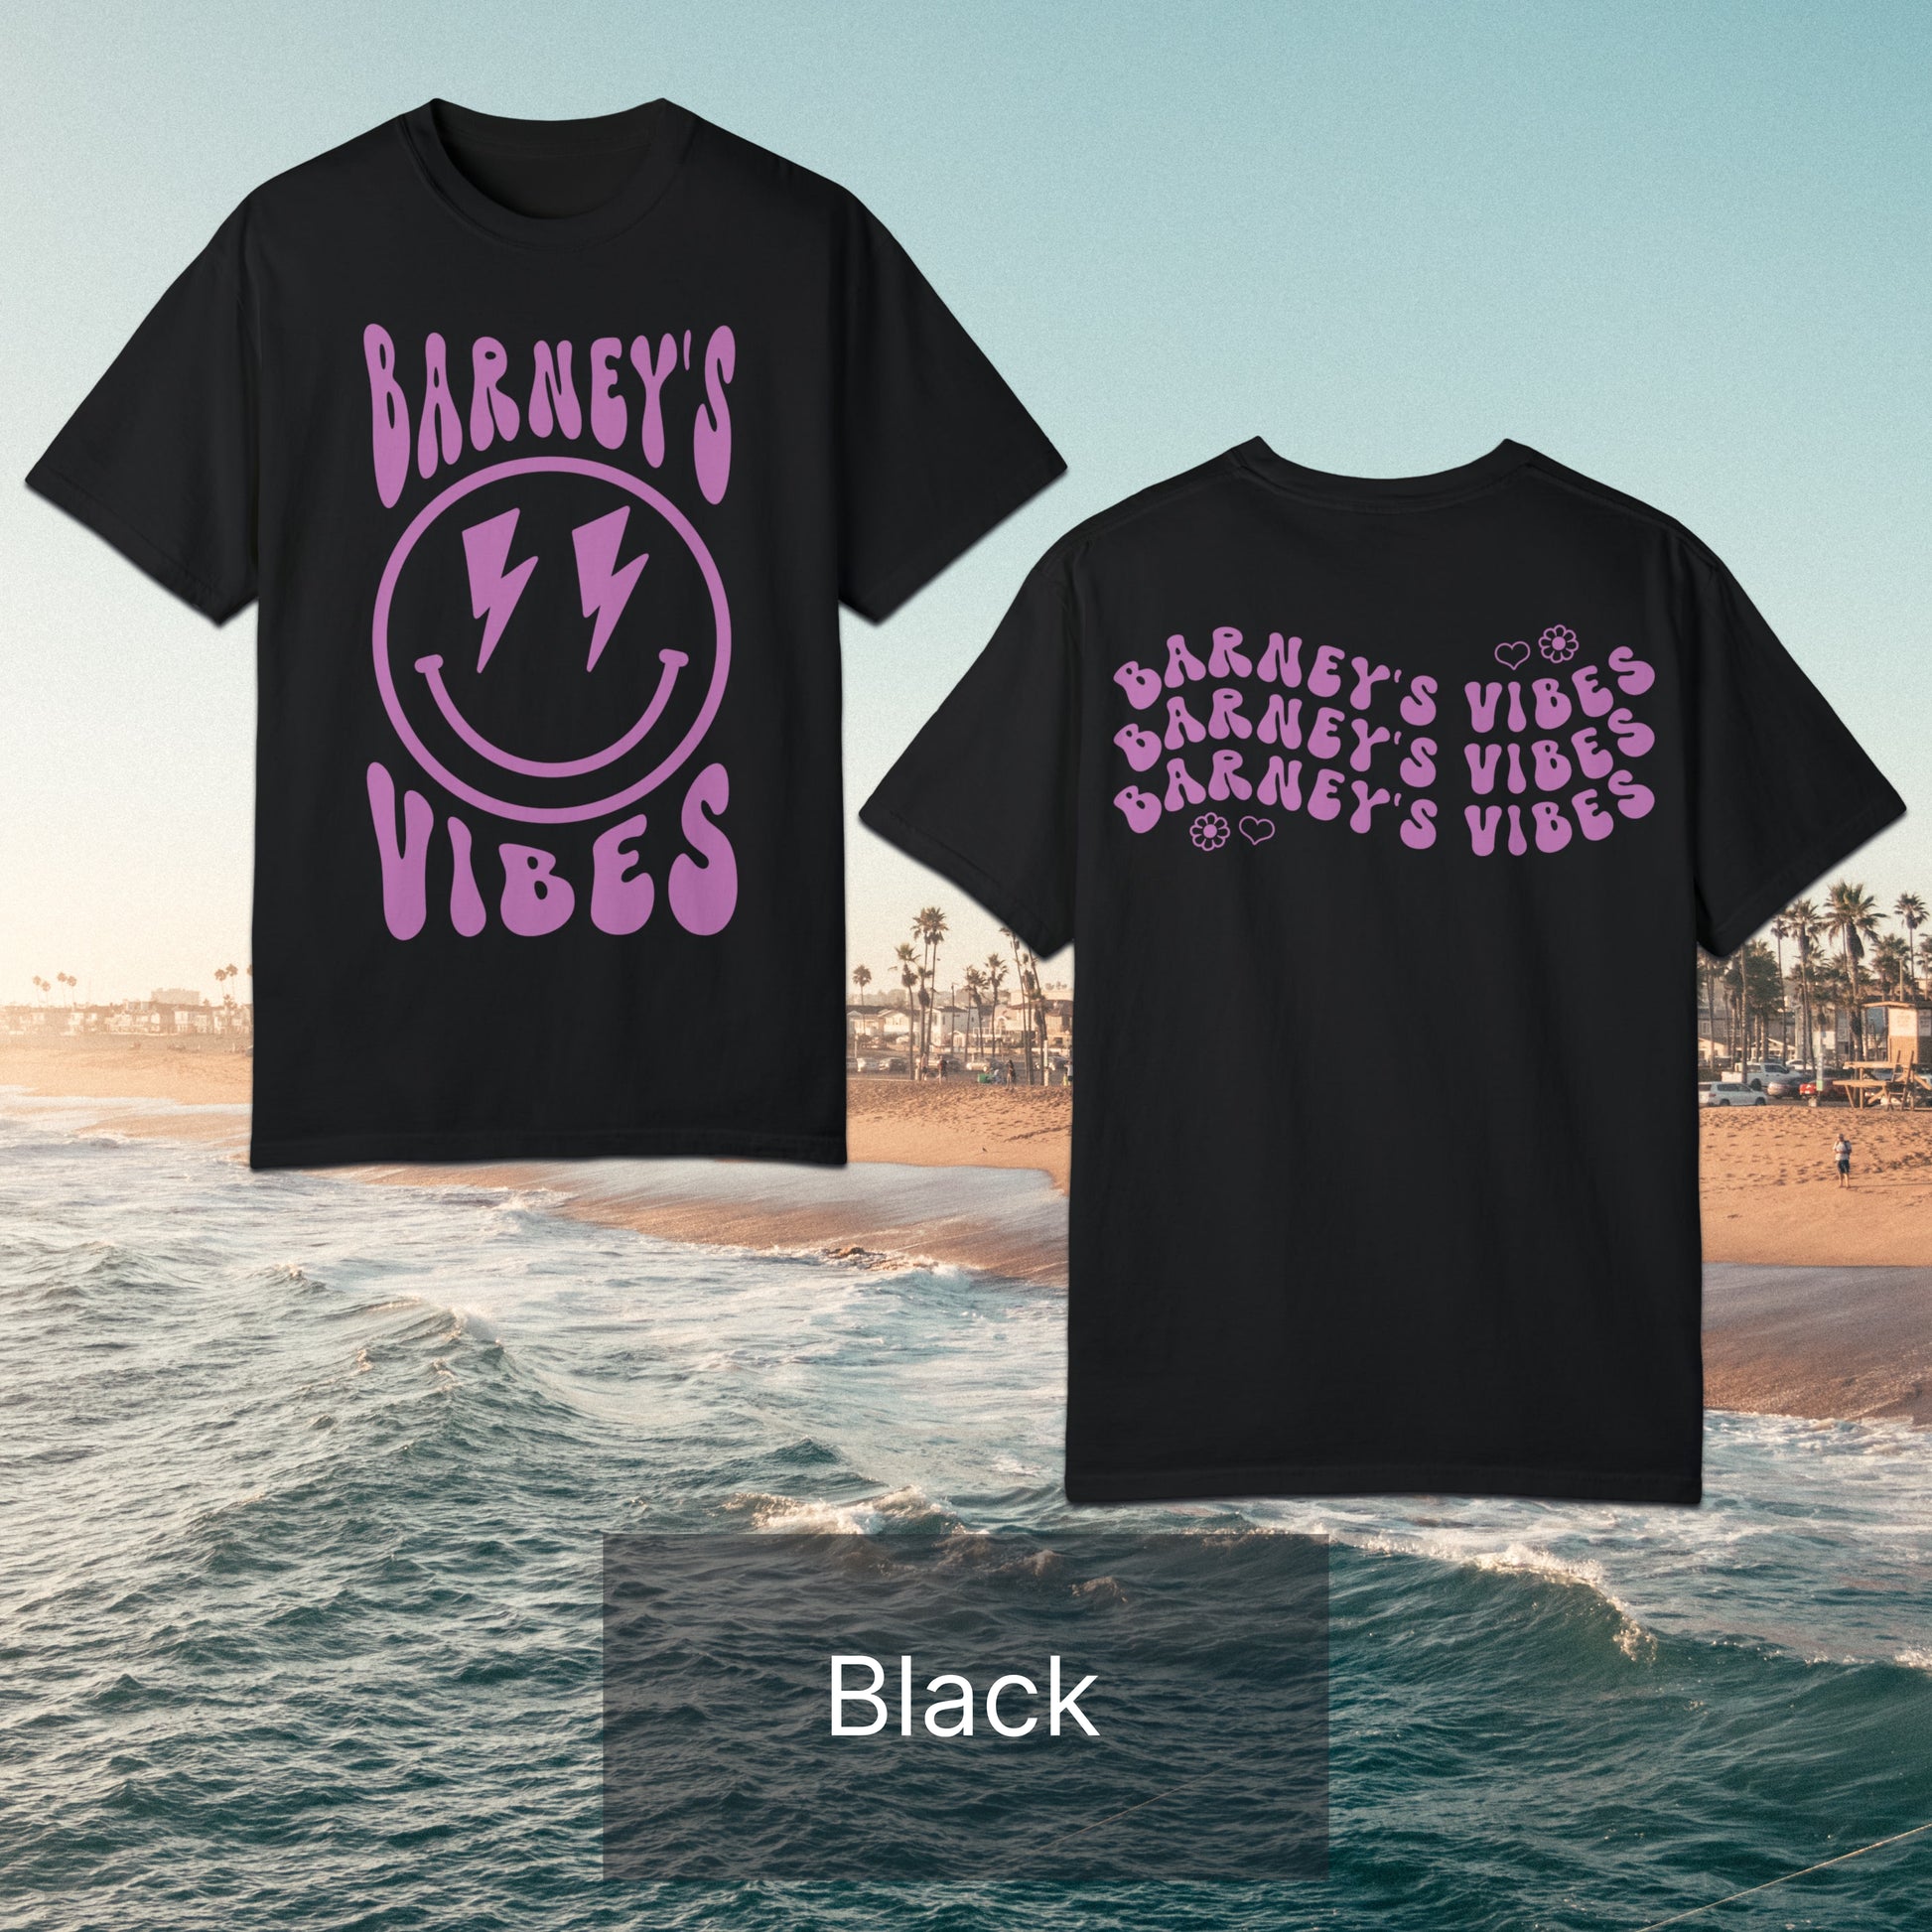 Barney's Vibes | BARNEY'S BEANERY - Women's Smiley Face Tee | Berry Graphics On Black T-Shirt, Front And Back Flat Lay View